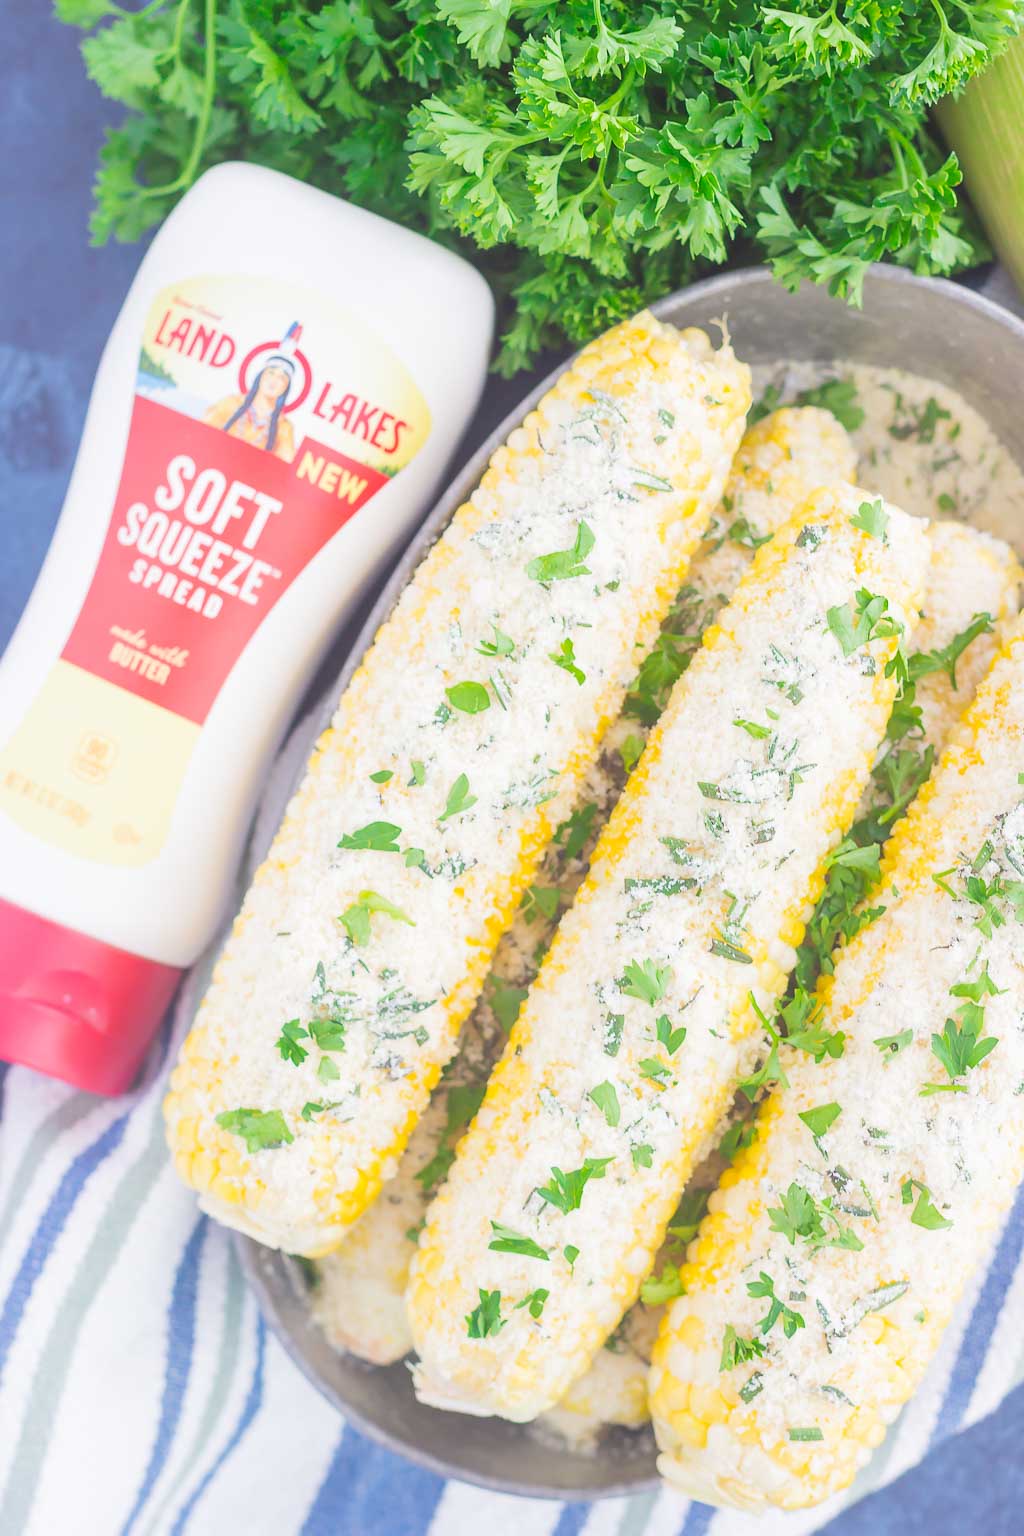 This Parmesan Herb Corn on the Cob is an easy side dish that's loaded with flavor. A buttery spread of Parmesan, garlic and herbs top fresh corn that's roasted to perfection. With just a few ingredients, you can have this simple dish ready in no time!